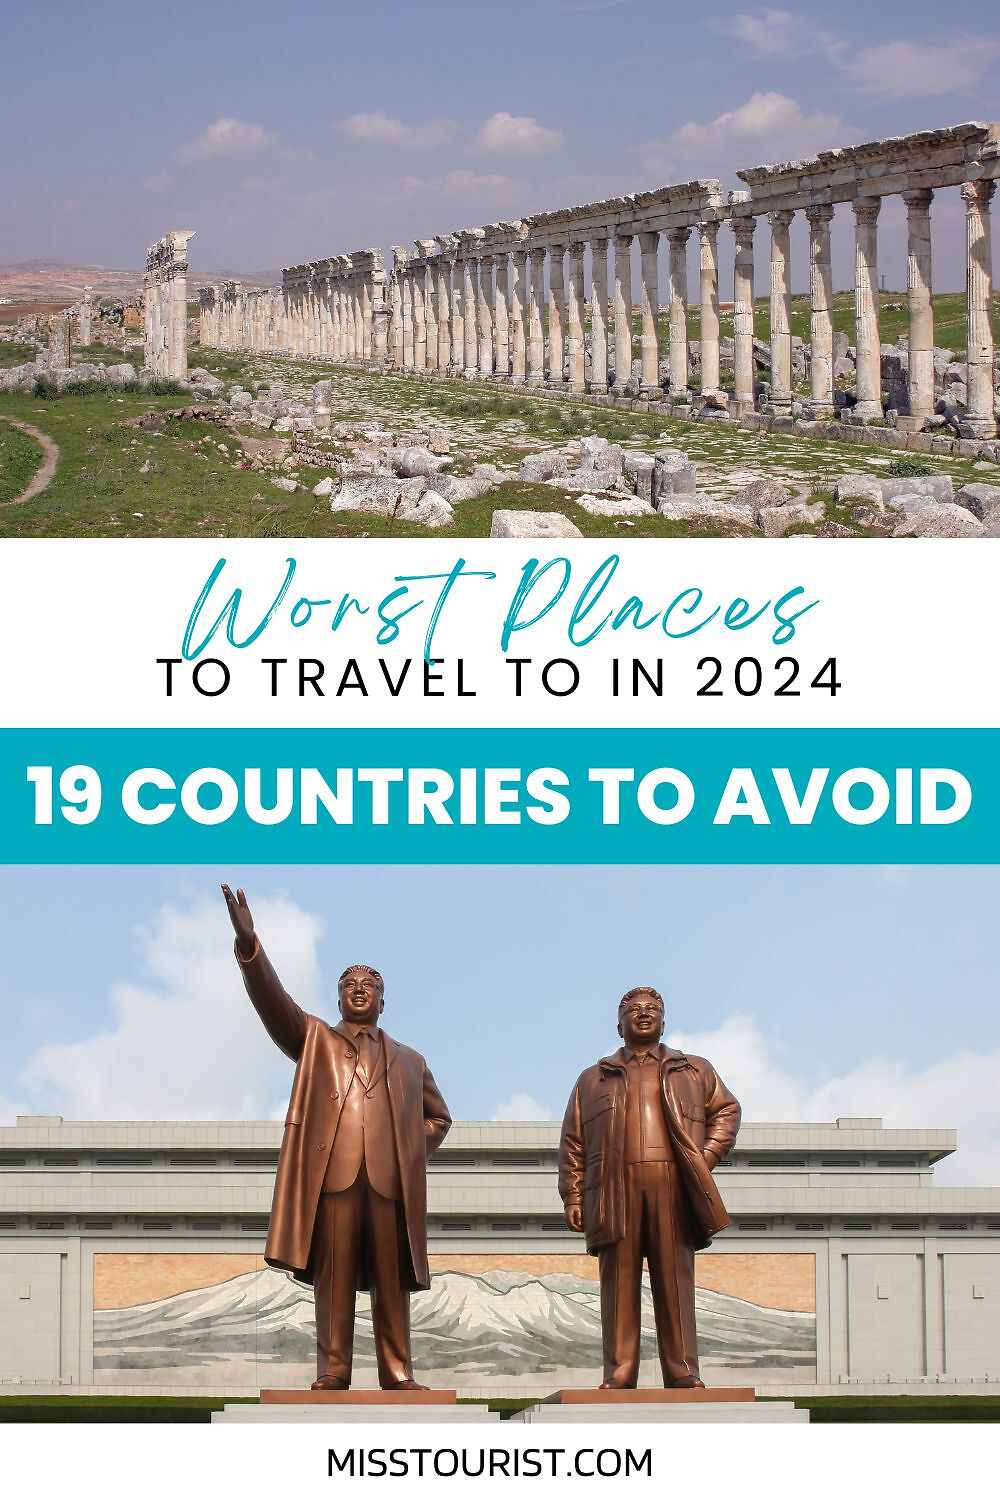 A split image with ancient ruins in the top part and two large statues in the bottom part, overlaid text reads "Worst Places to Travel to in 2024 - 19 Countries to Avoid".